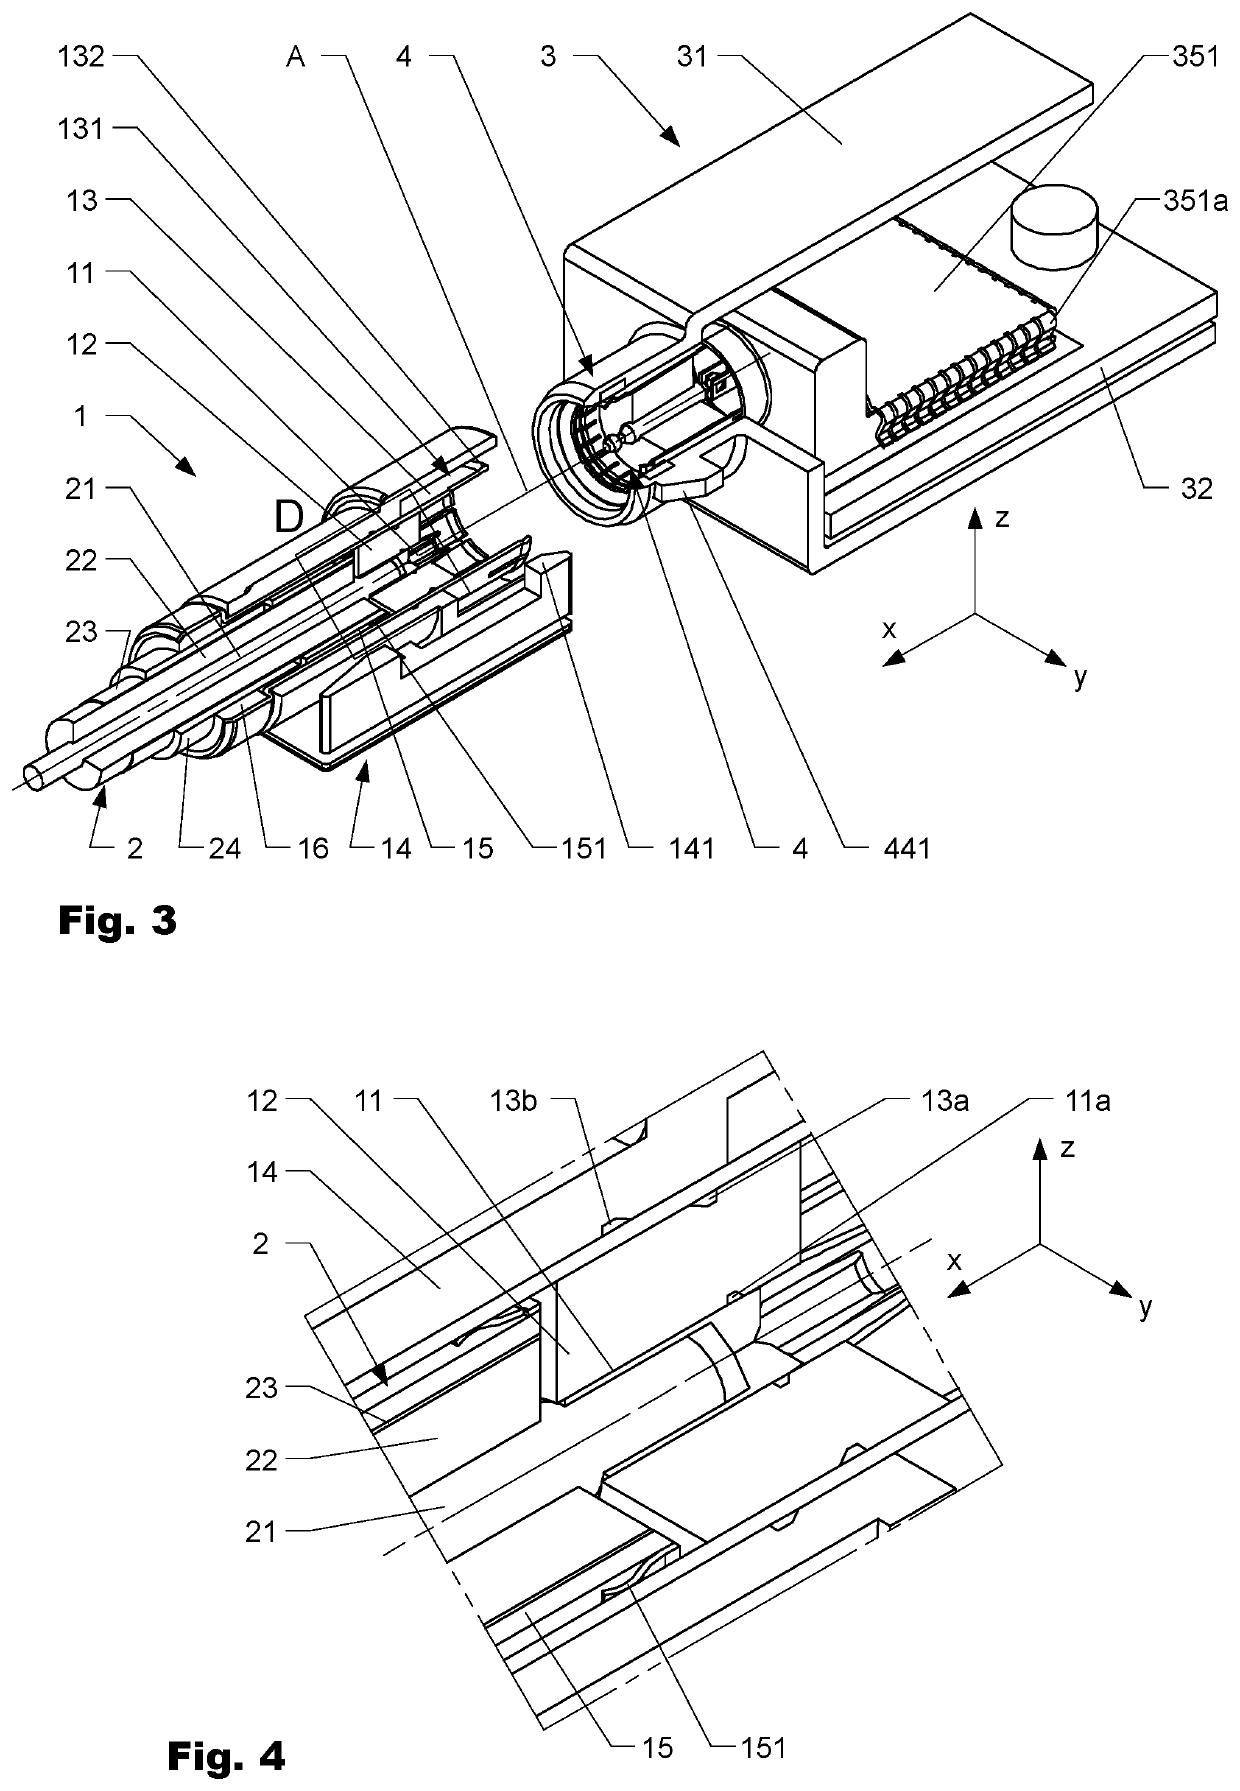 Coaxial connector and cable assembly